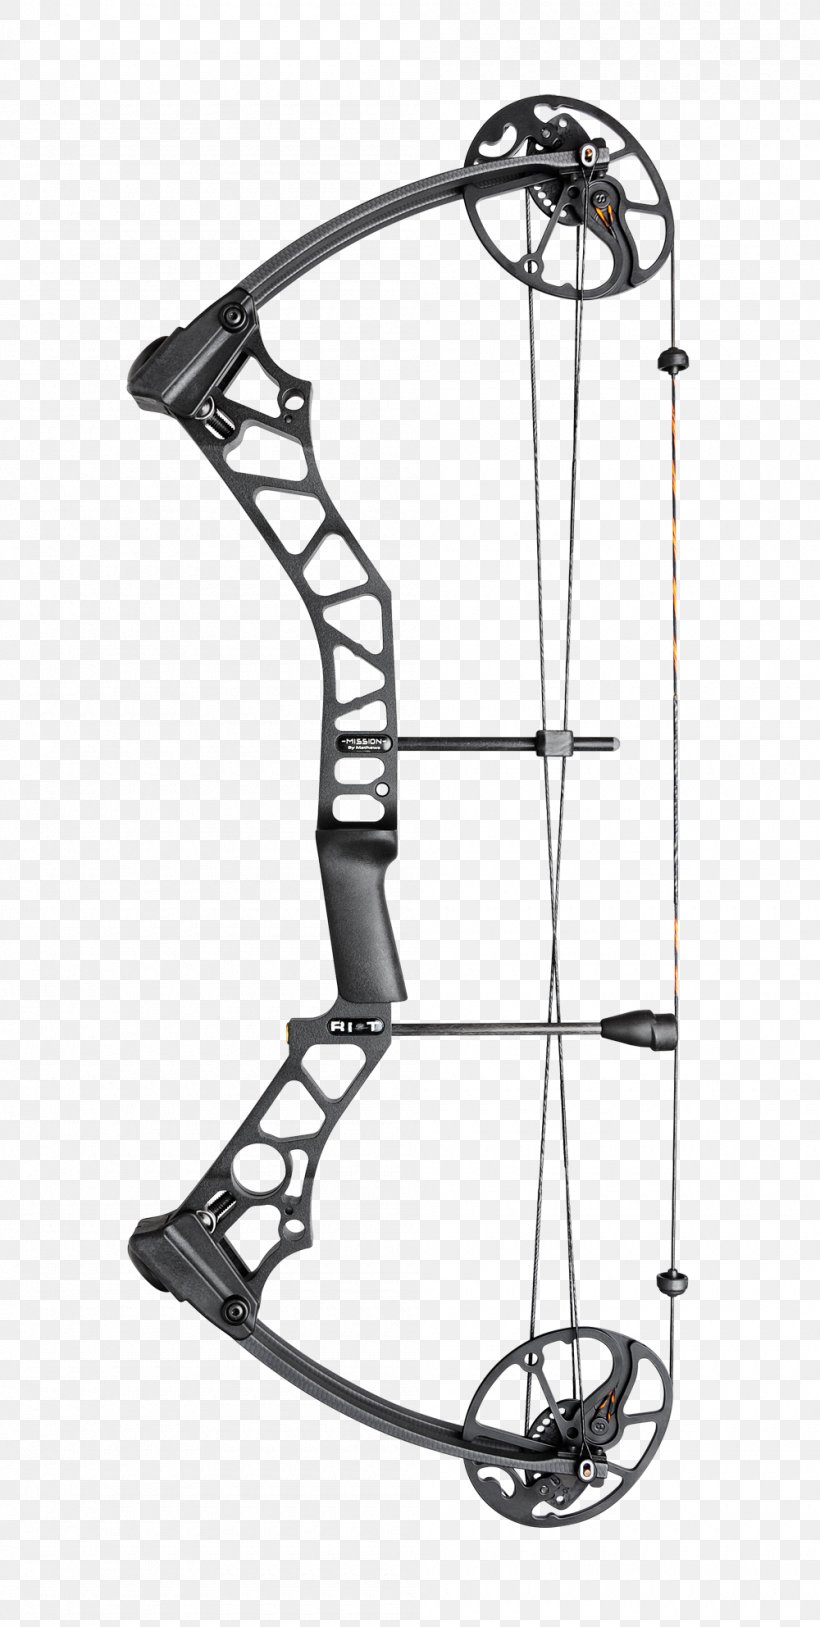 Compound Bows Bow And Arrow Archery Hunting, PNG, 1000x1985px, Compound Bows, Archery, Black And White, Bow, Bow And Arrow Download Free